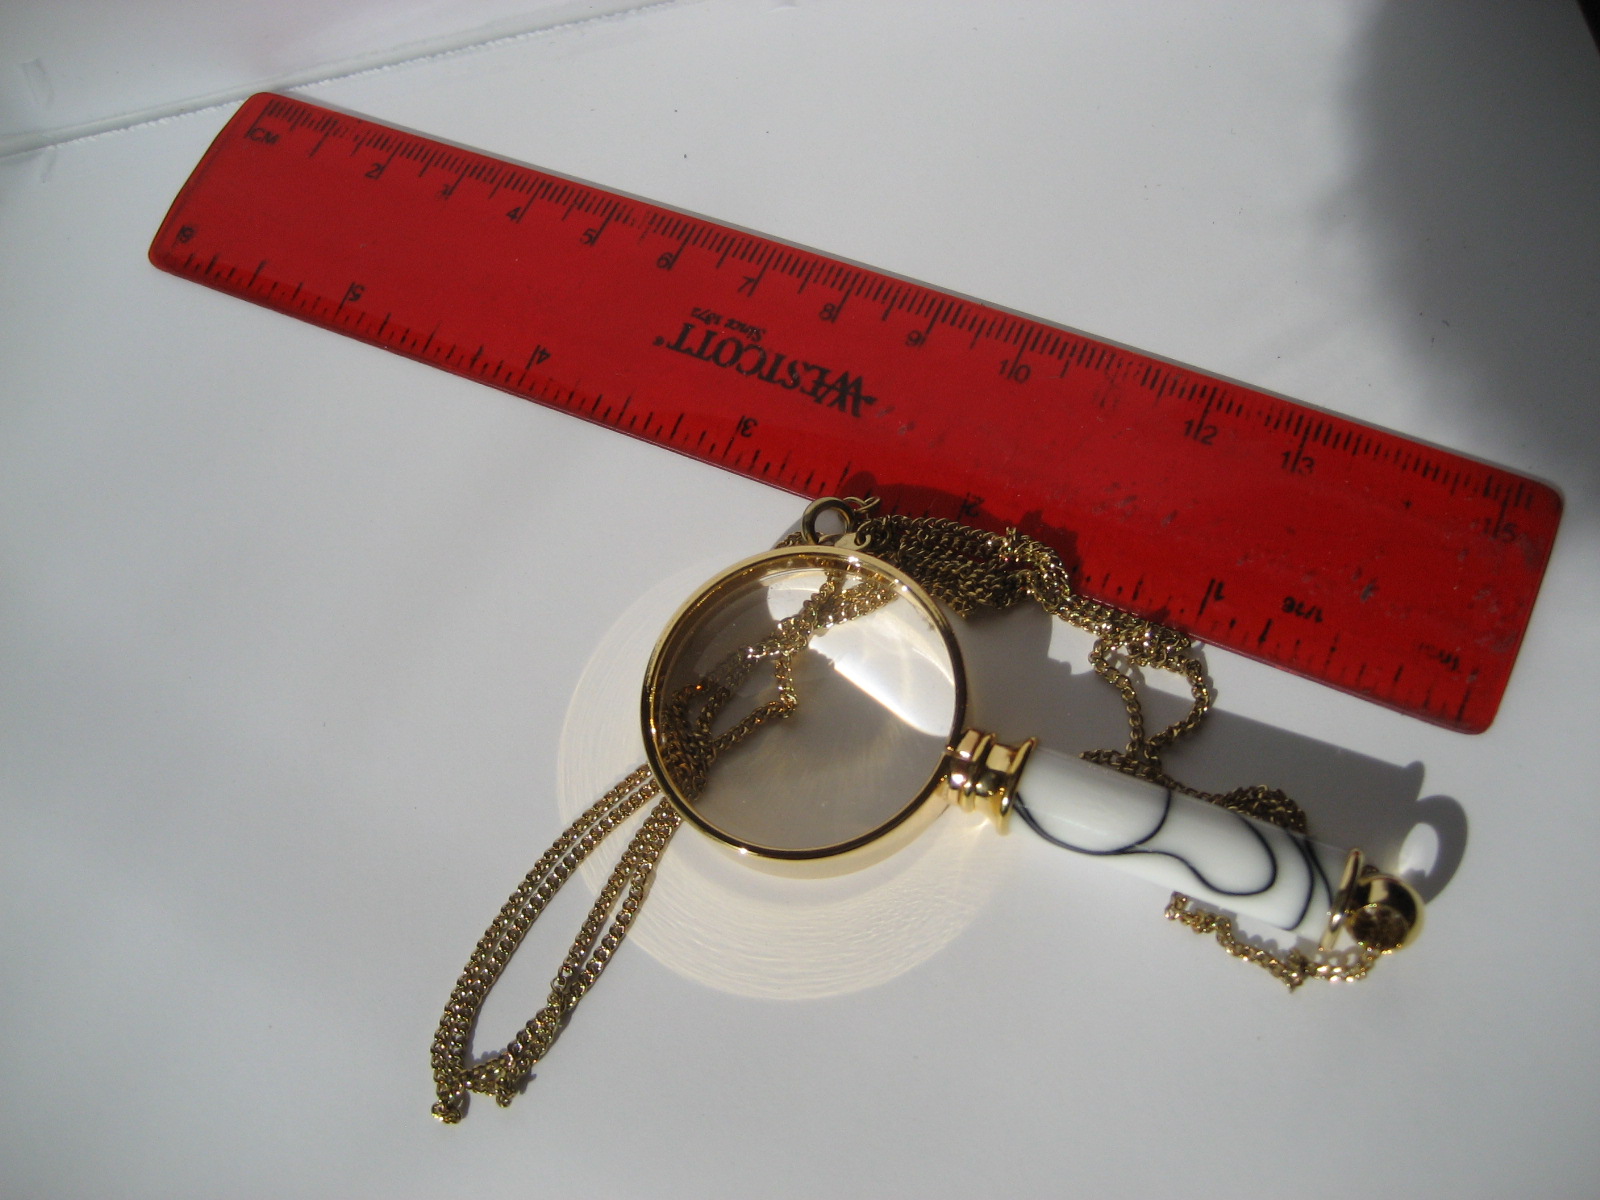 Small magnifier